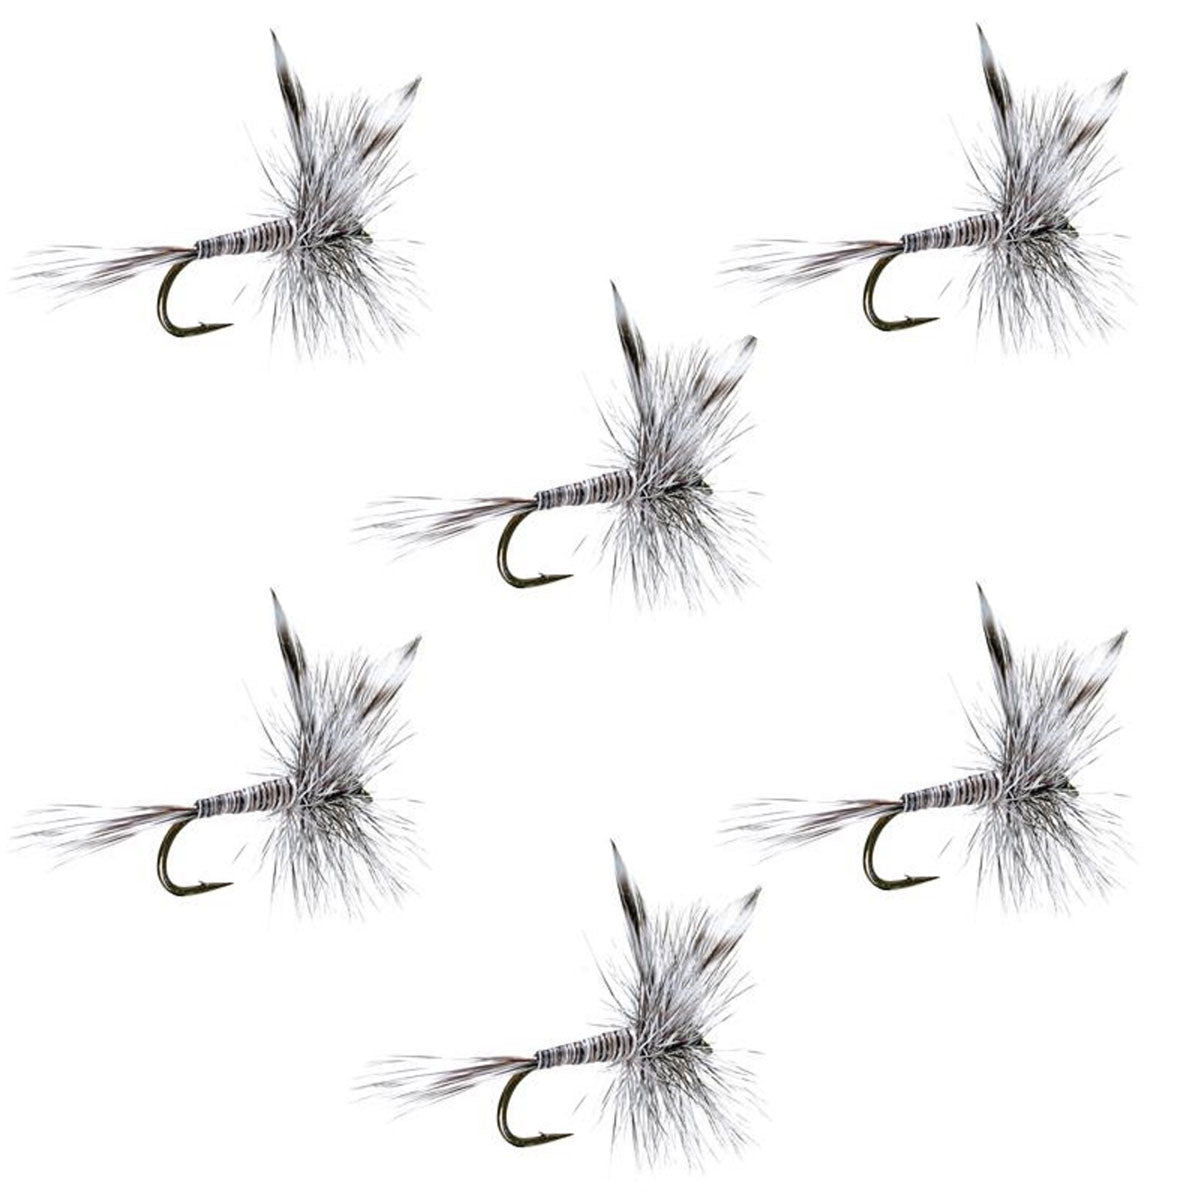 Mosquito Classic Trout Dry Fly Fishing Flies - Set of 6 Flies Size 12